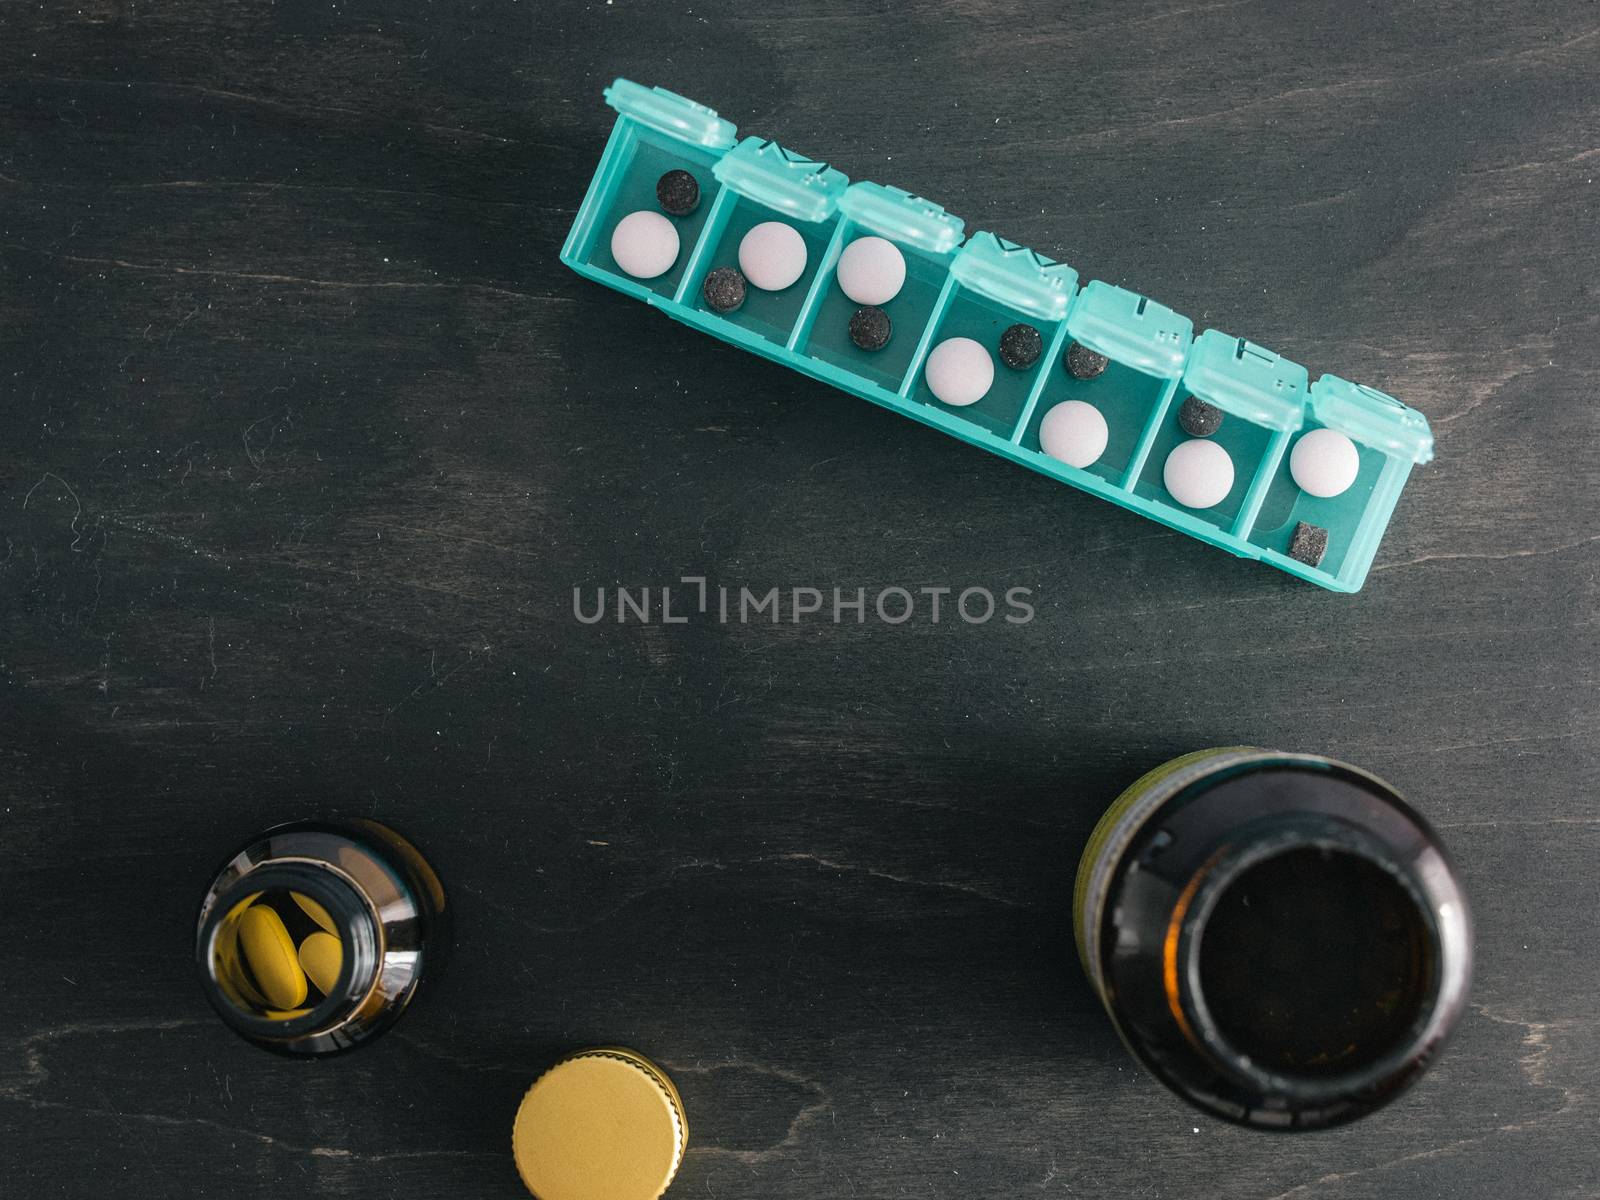 Top view of seven day pill box with pills. Green pill-box with pills visible. Open pill box and jars on dark wooden table. Copy space. Top view or flat lay.Healthy lifestyle and medical concept